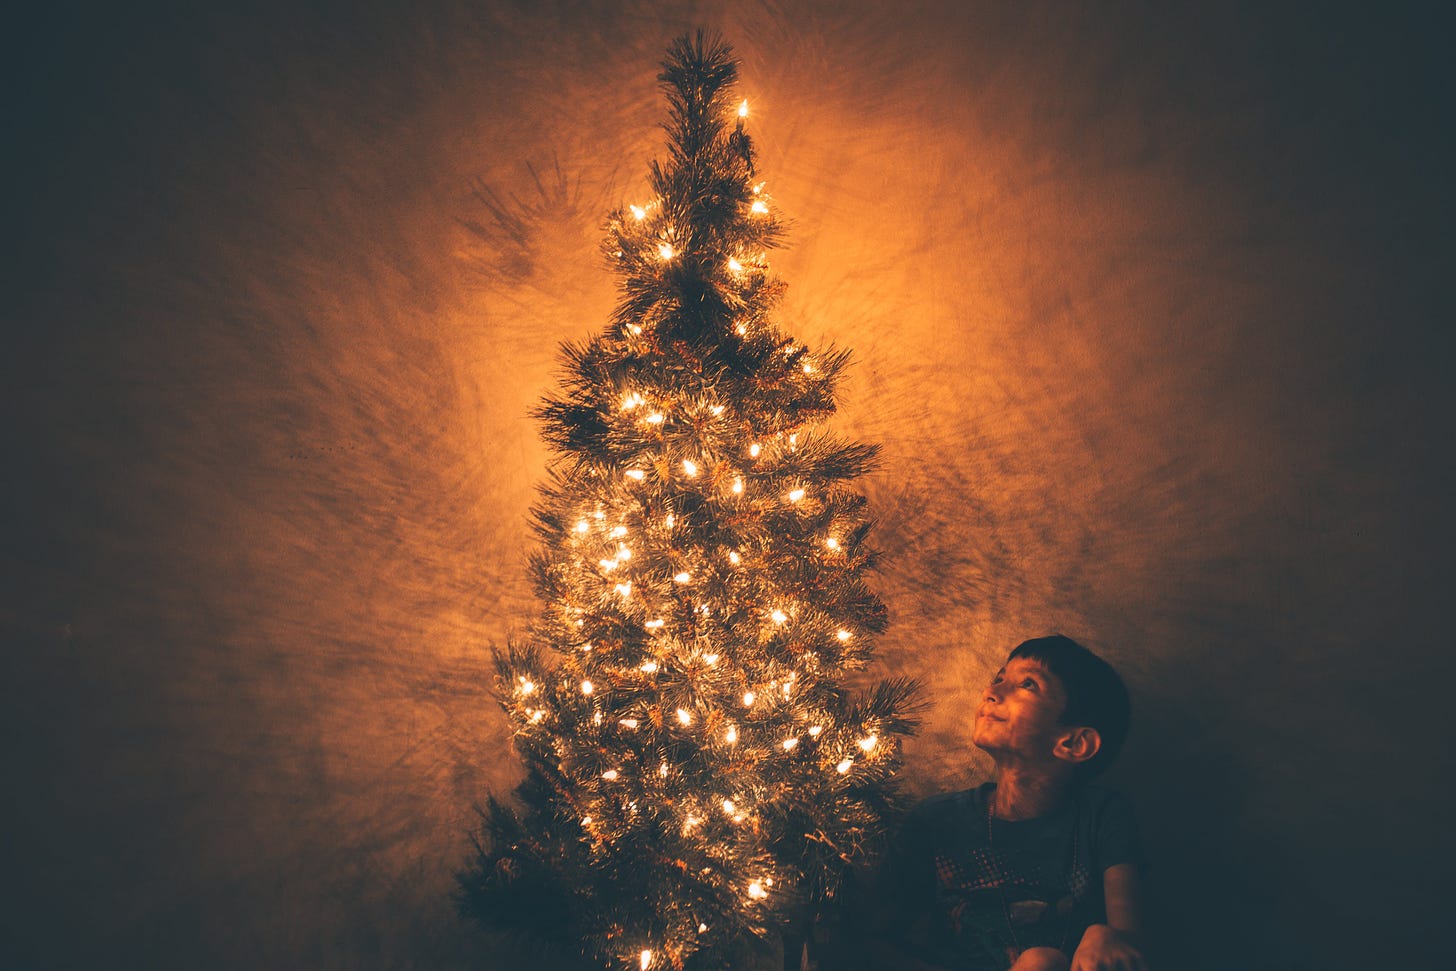 Child admiring a decorated Christmas tree